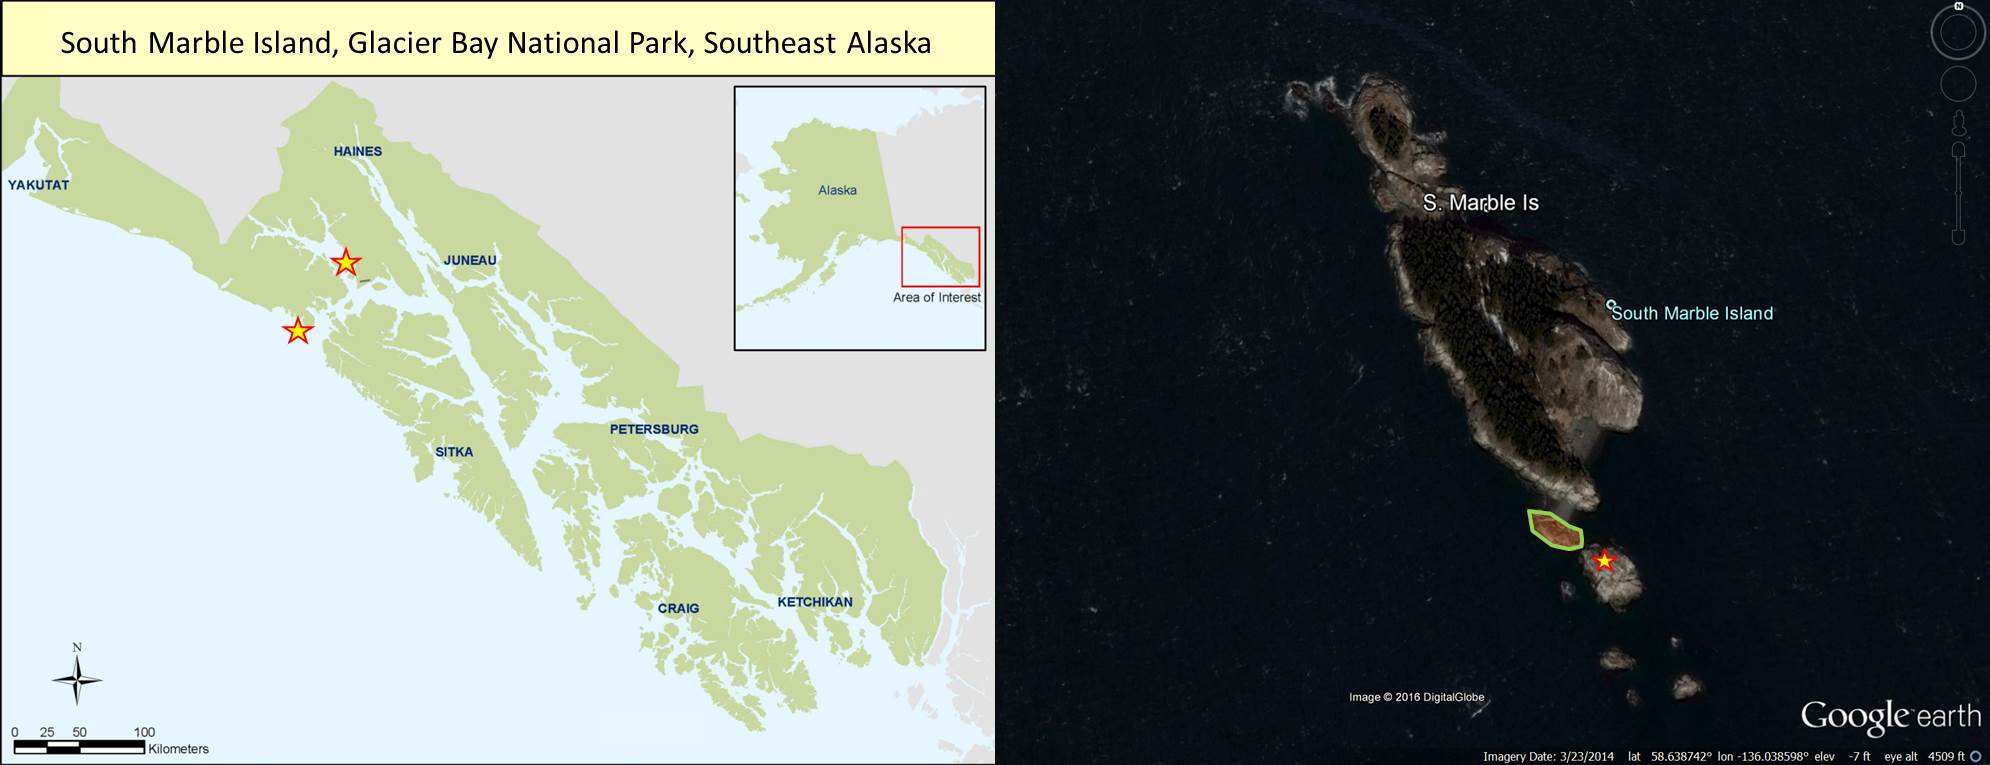 Map and image of sea lion haul outs in Glacier Bay